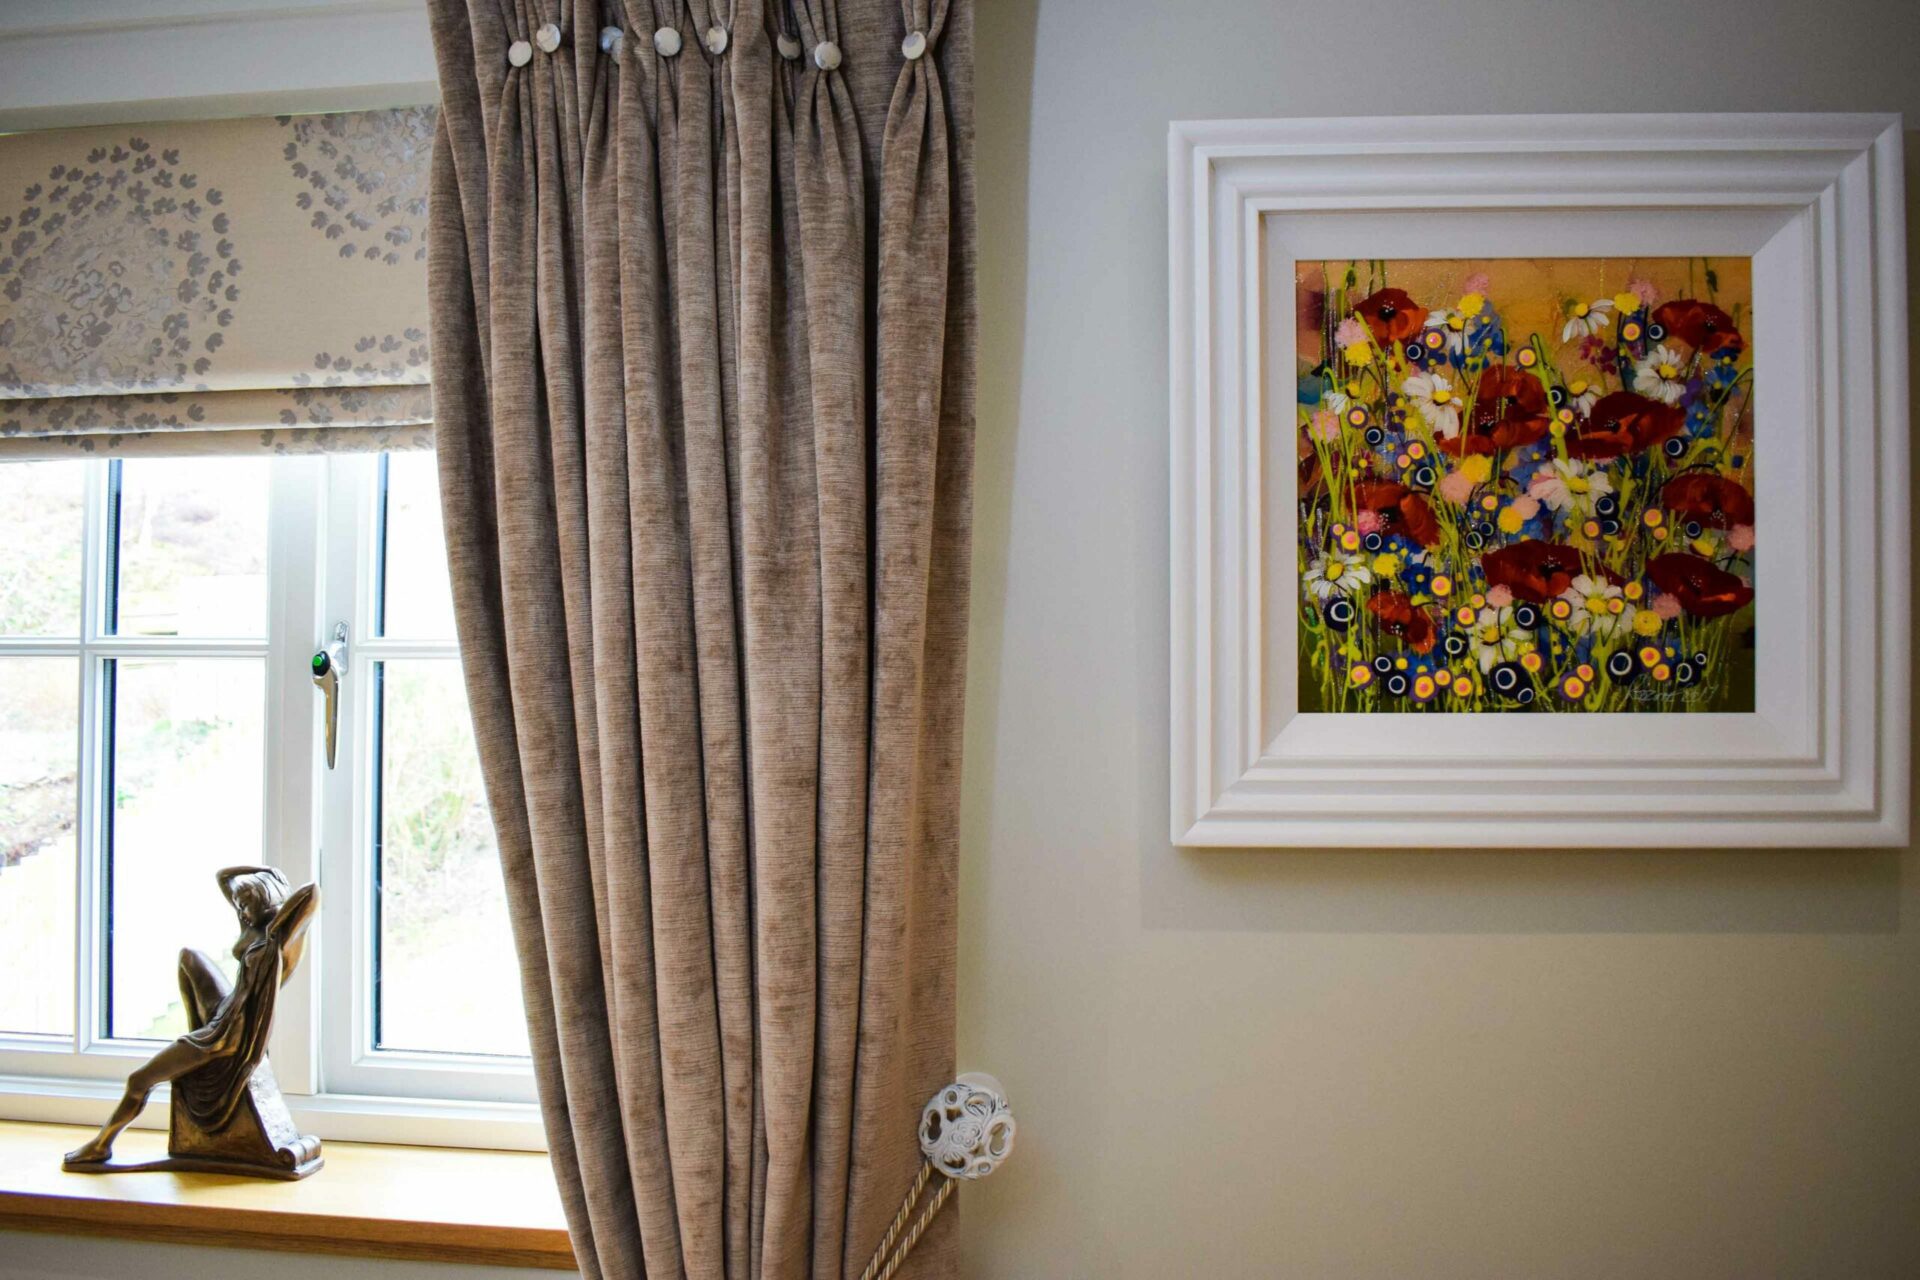 Decorated with beautiful art, our Skyfall Hideaway